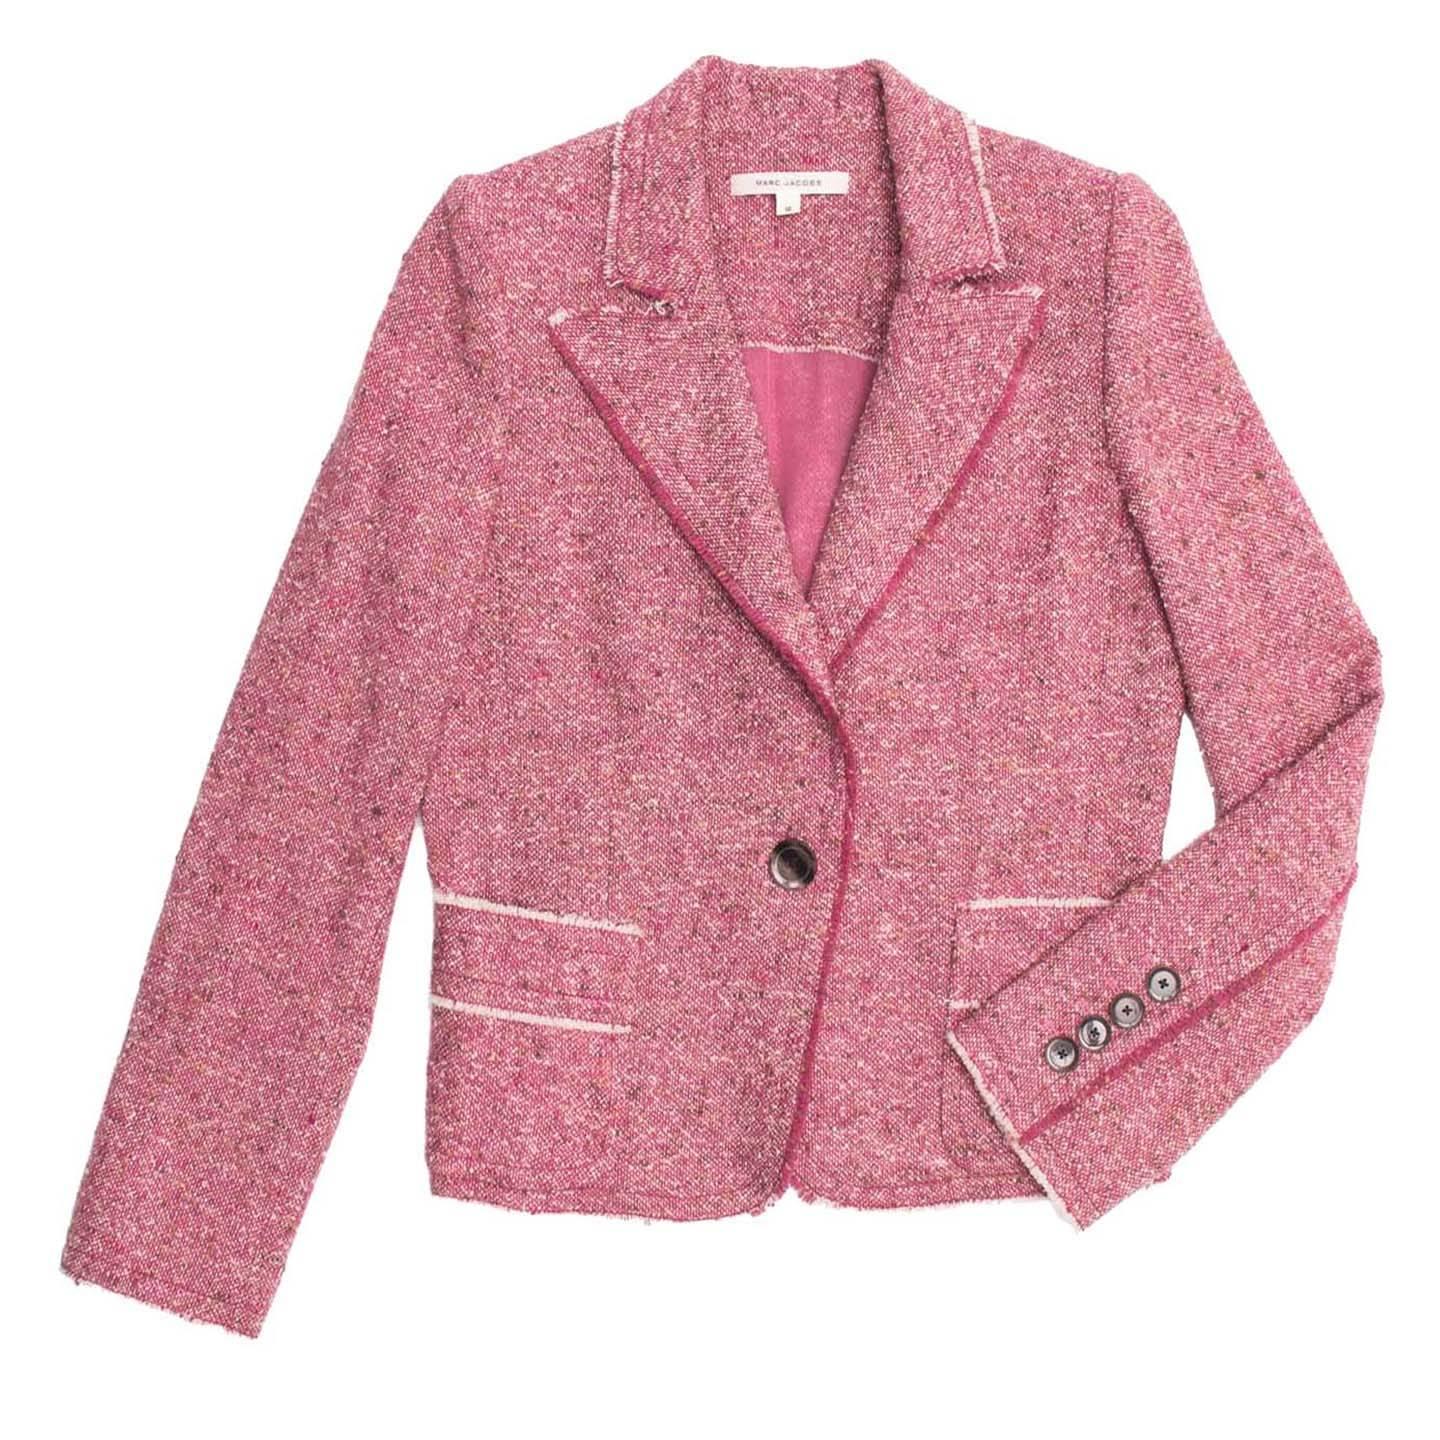 Pink tweed wool single button blazer. The neck profile and most of the seams on body and sleeves are raw edge with short pink or white fringes, as well as on the patch pocket and the back bukle. The style is fitted and the waist line is defined and